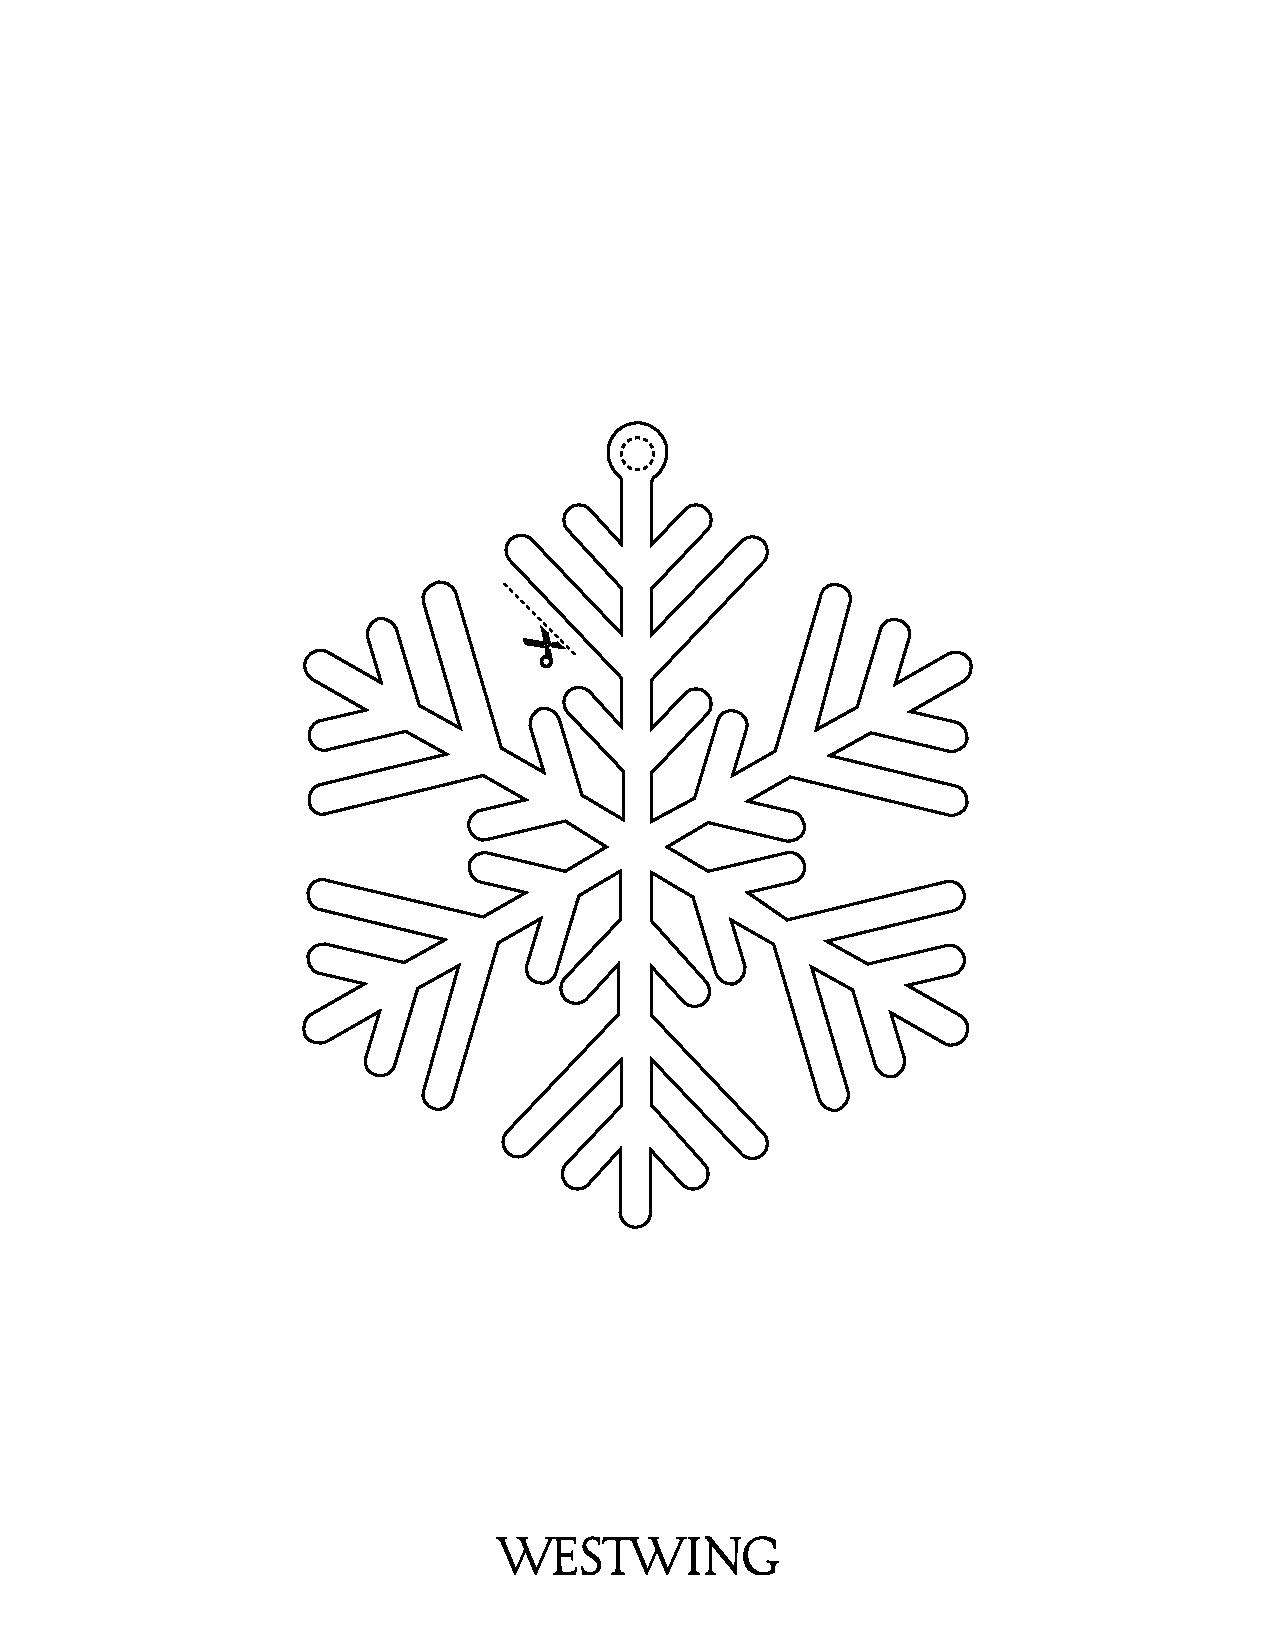 Snowflake to cut out